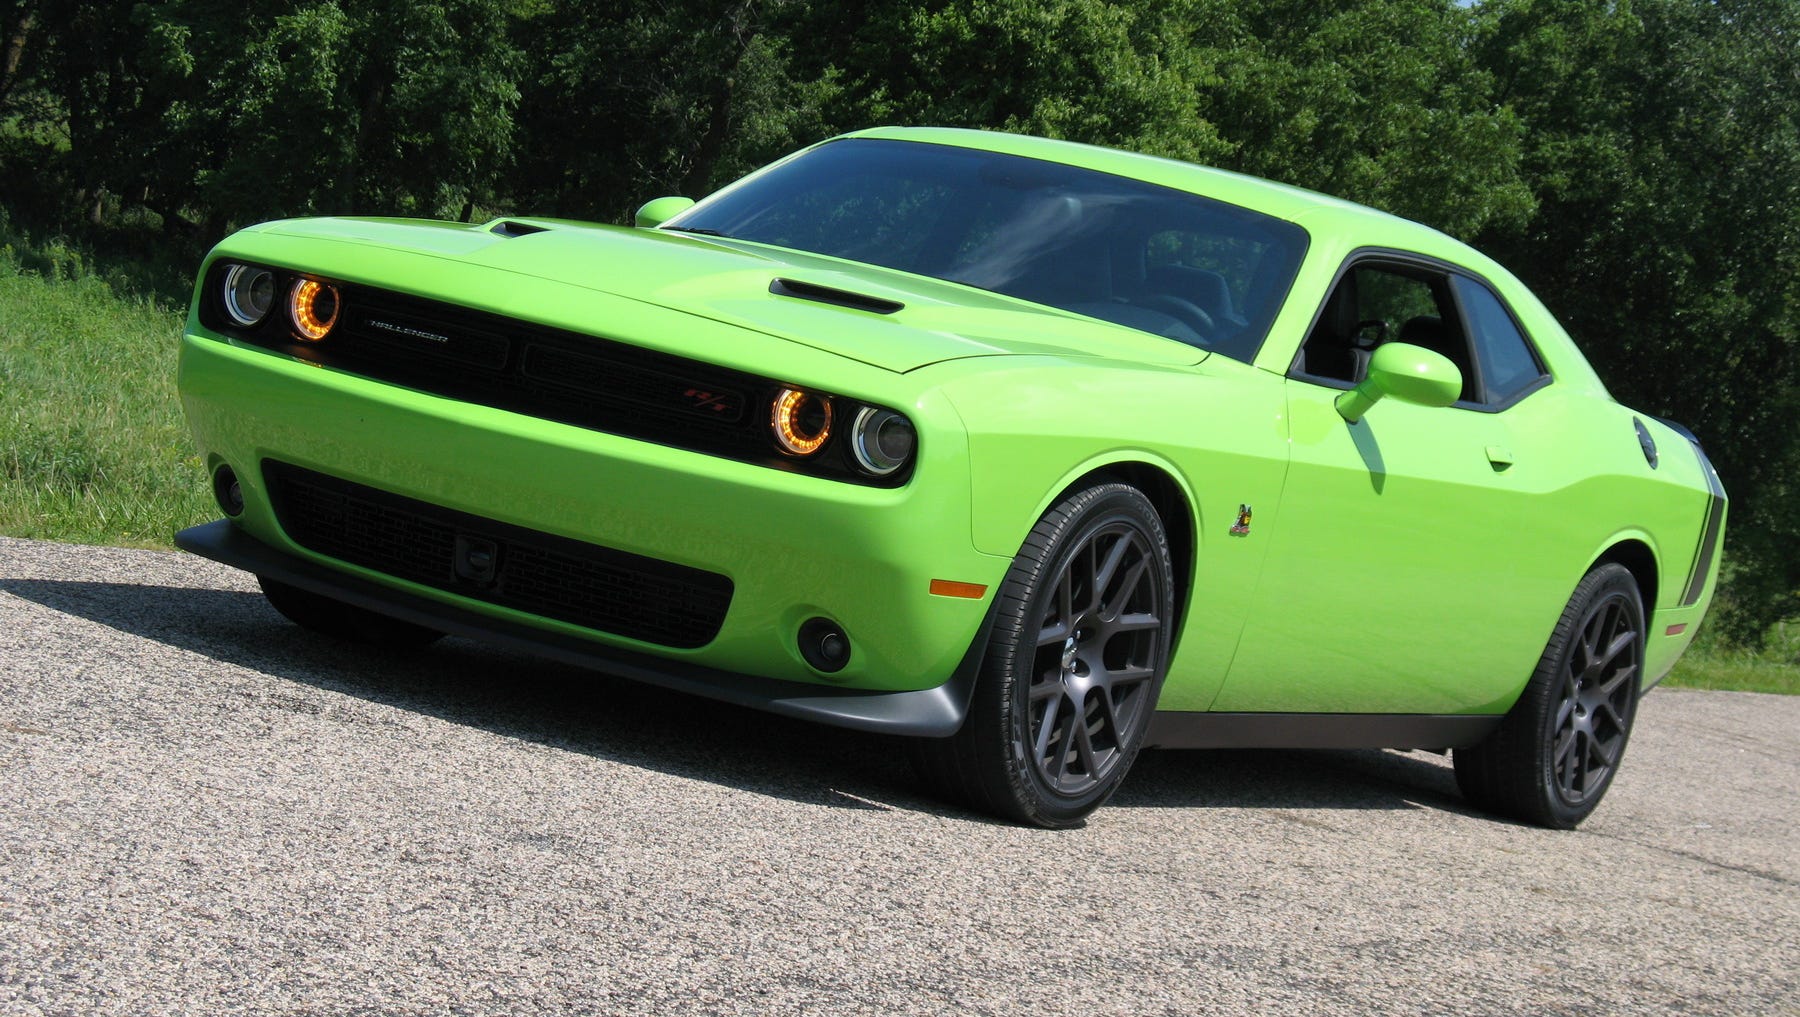 2015 Dodge Challenger is modern American muscle